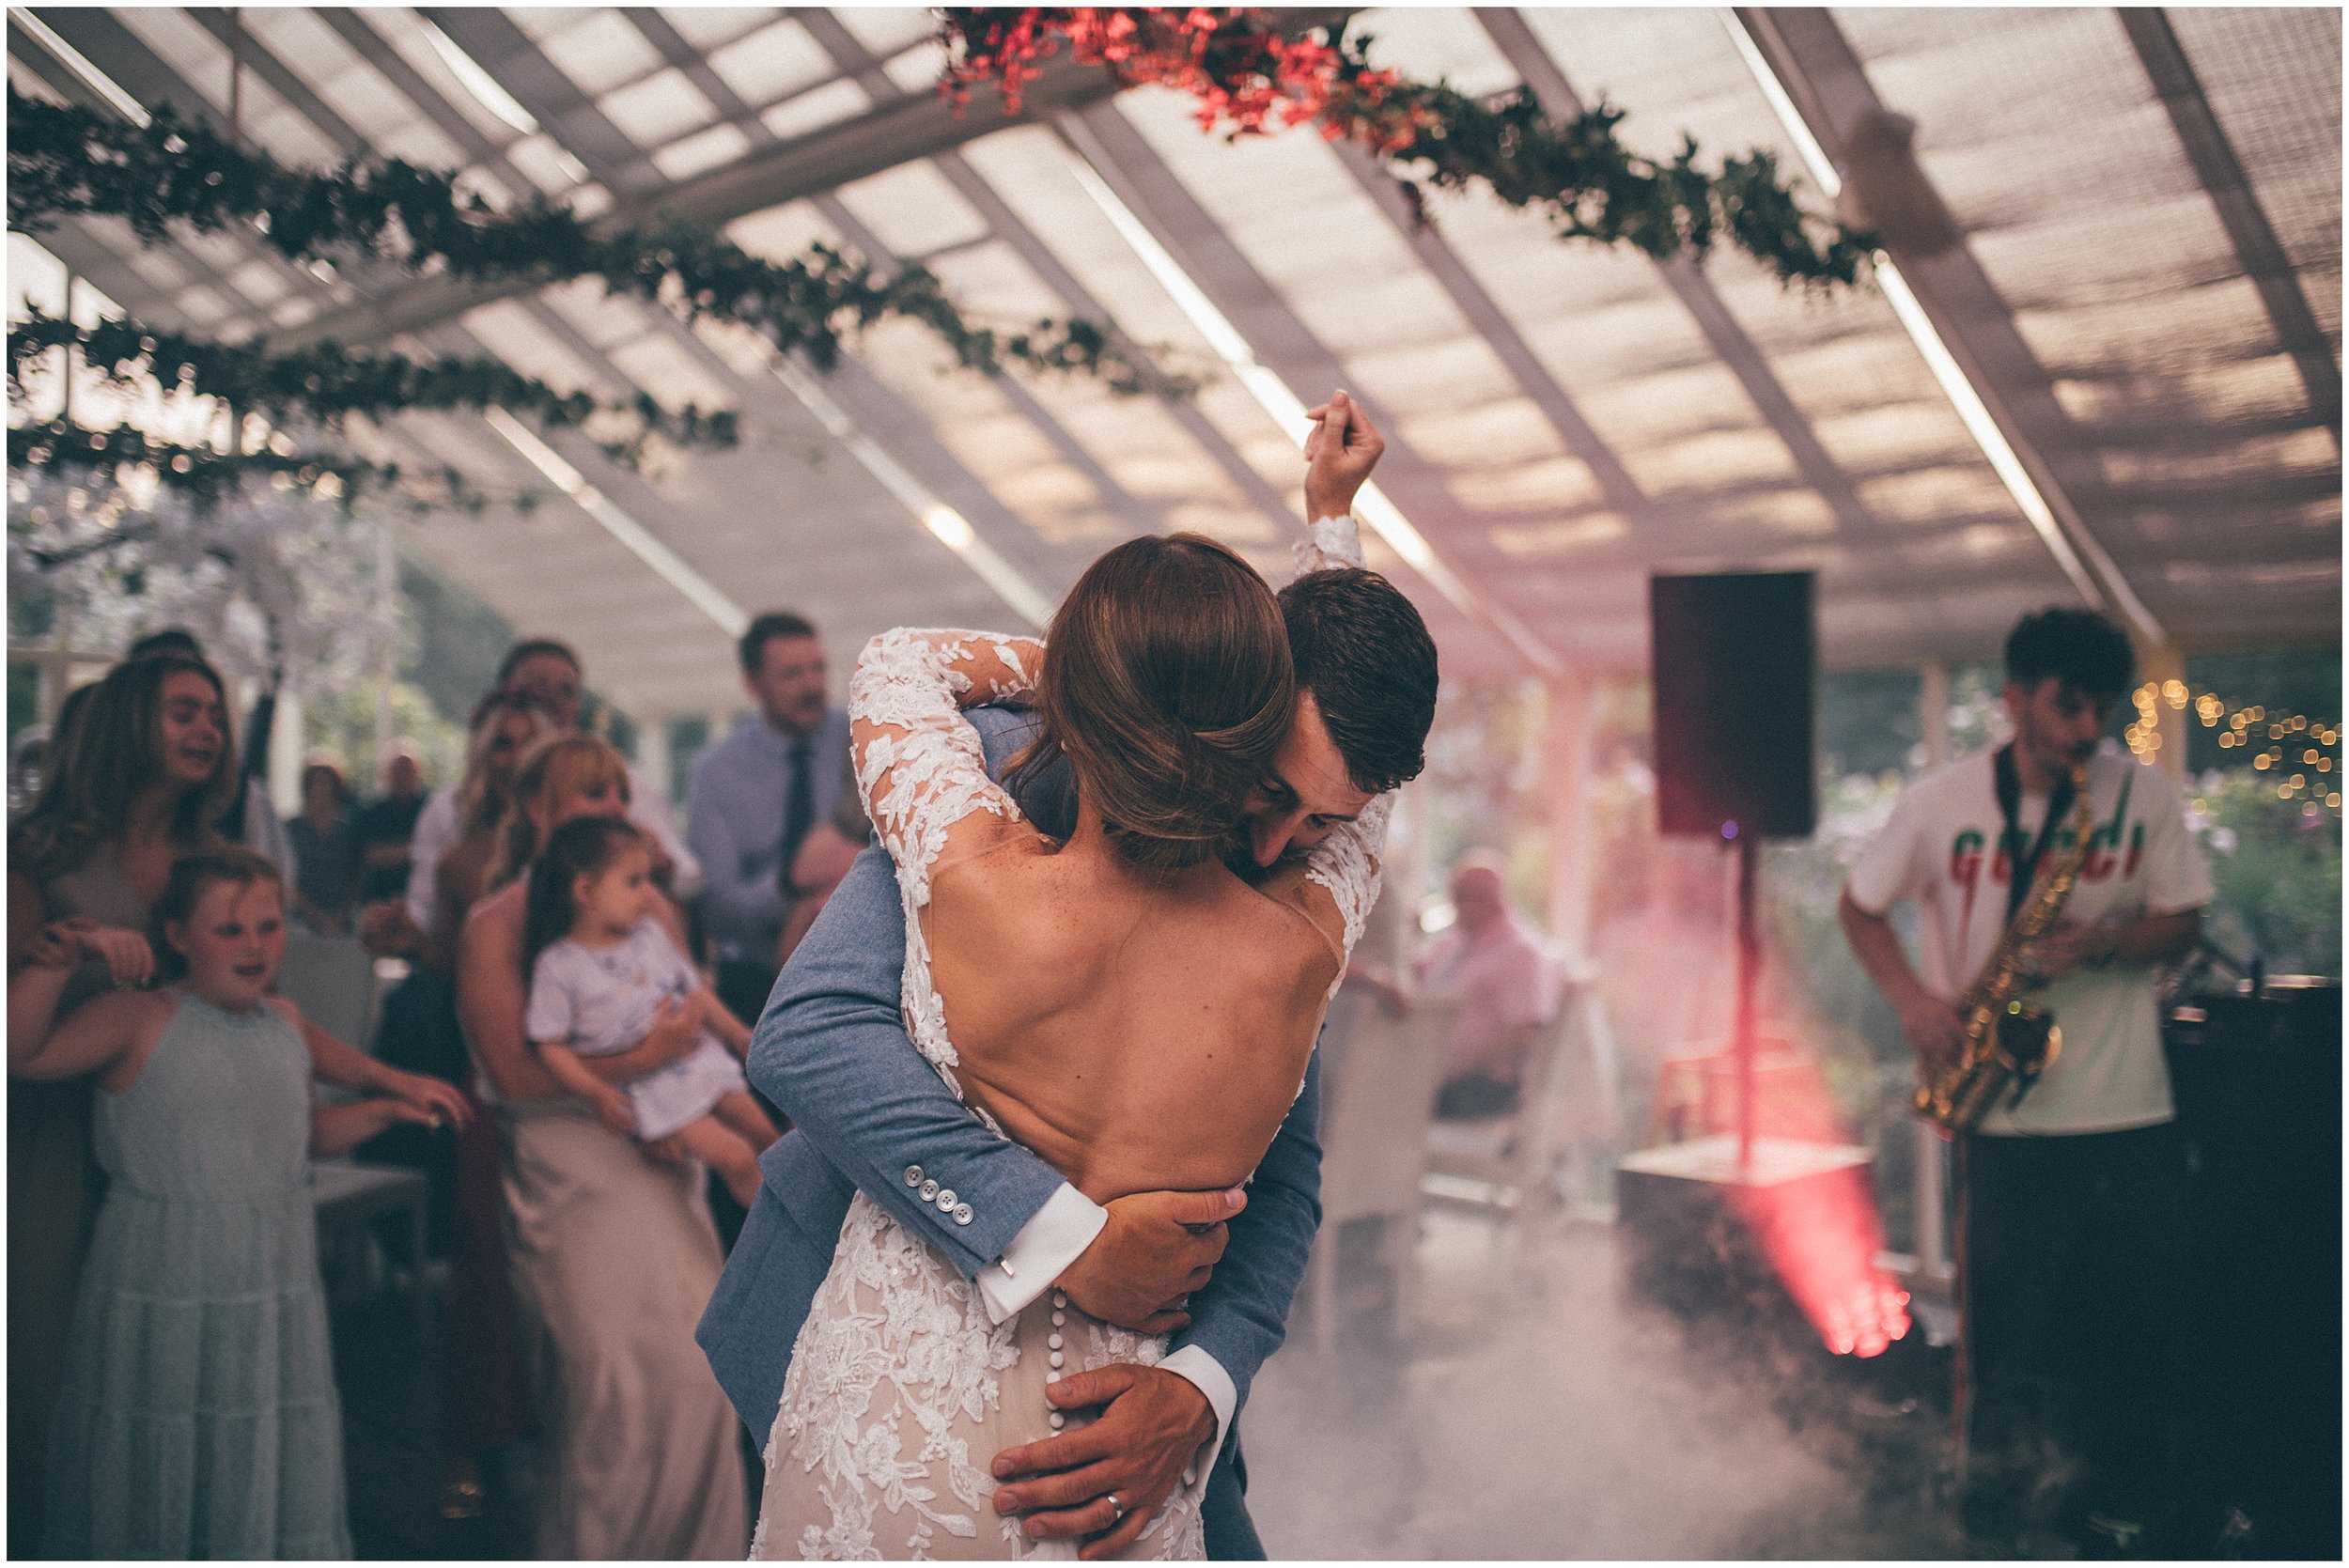 Bride and groom enjoy the dancefloor during their First Dance at Abbeywood Estate wedding venue in Delamere, Cheshire.